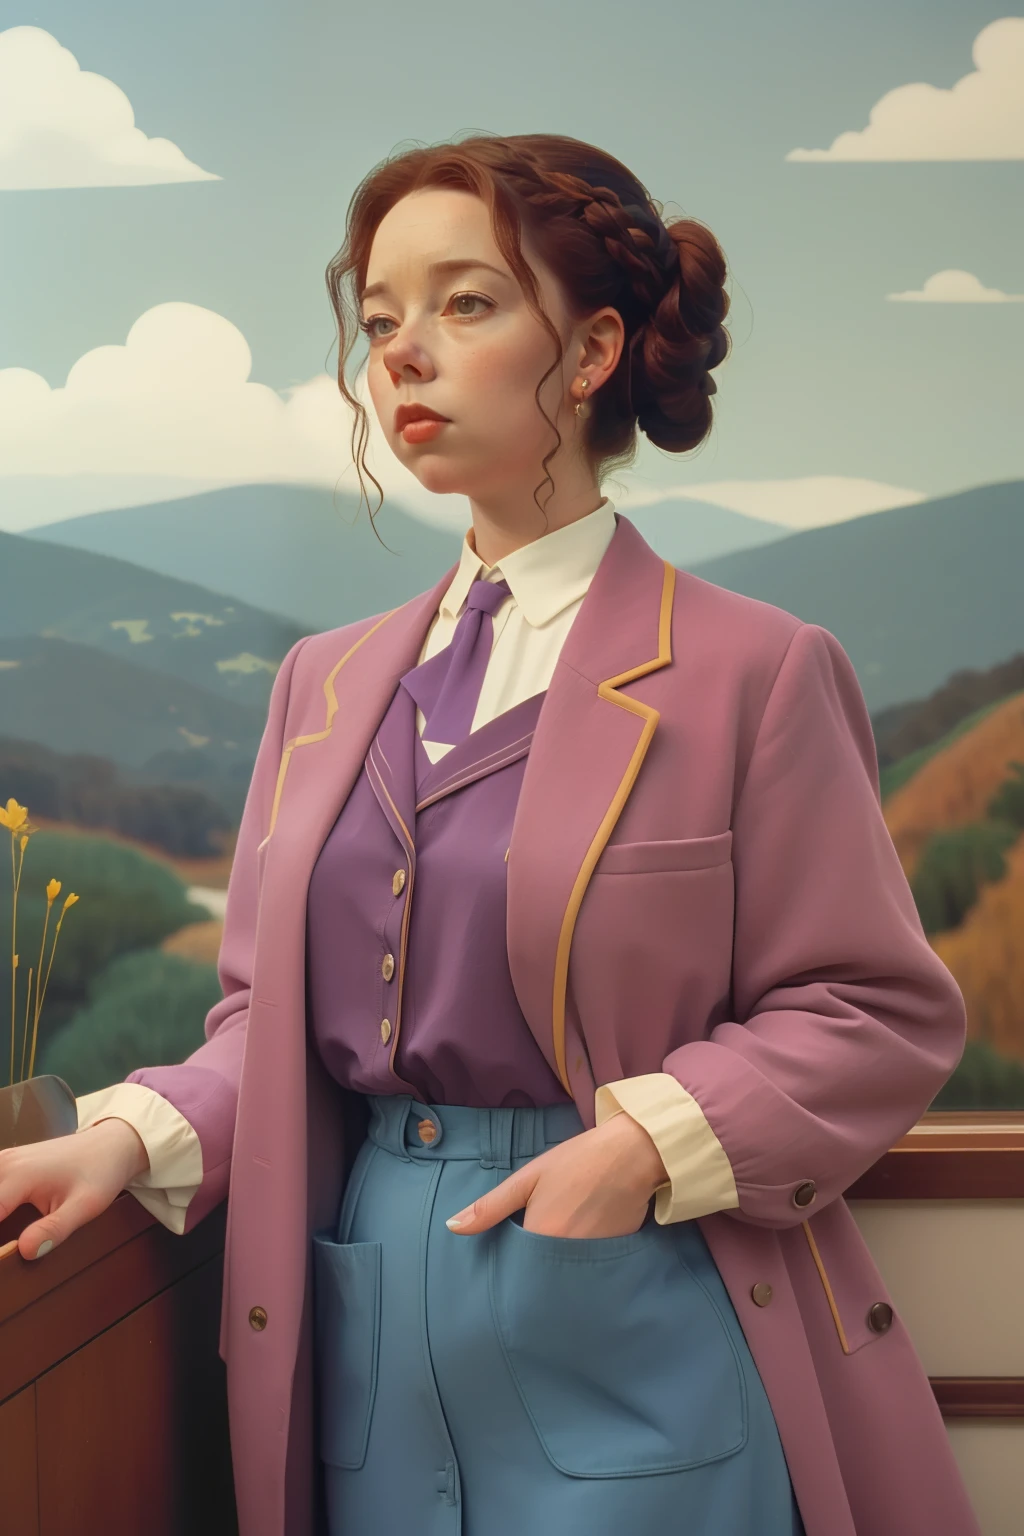 1995, massachusetts mountain village. Pre-raphaelite ((((40-year-old)) Olivia Colman)), doctor, going to work, ((((casual Clothing from the 1990s)))) ((Hairstyle of the 1990s)), ((Wes Anderson cinematic style)), colorful